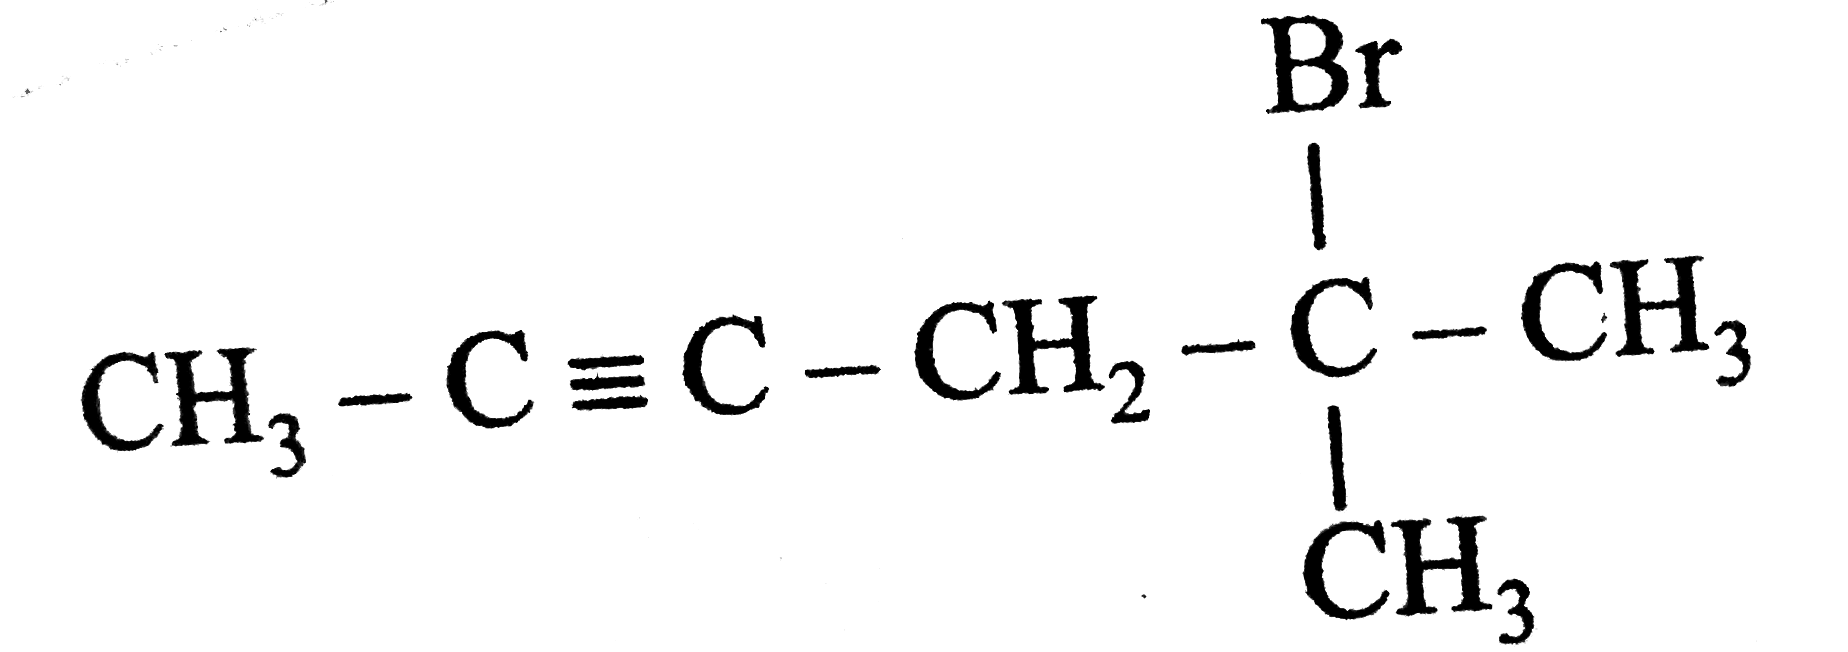 What is the IUPACname of the following compound ?